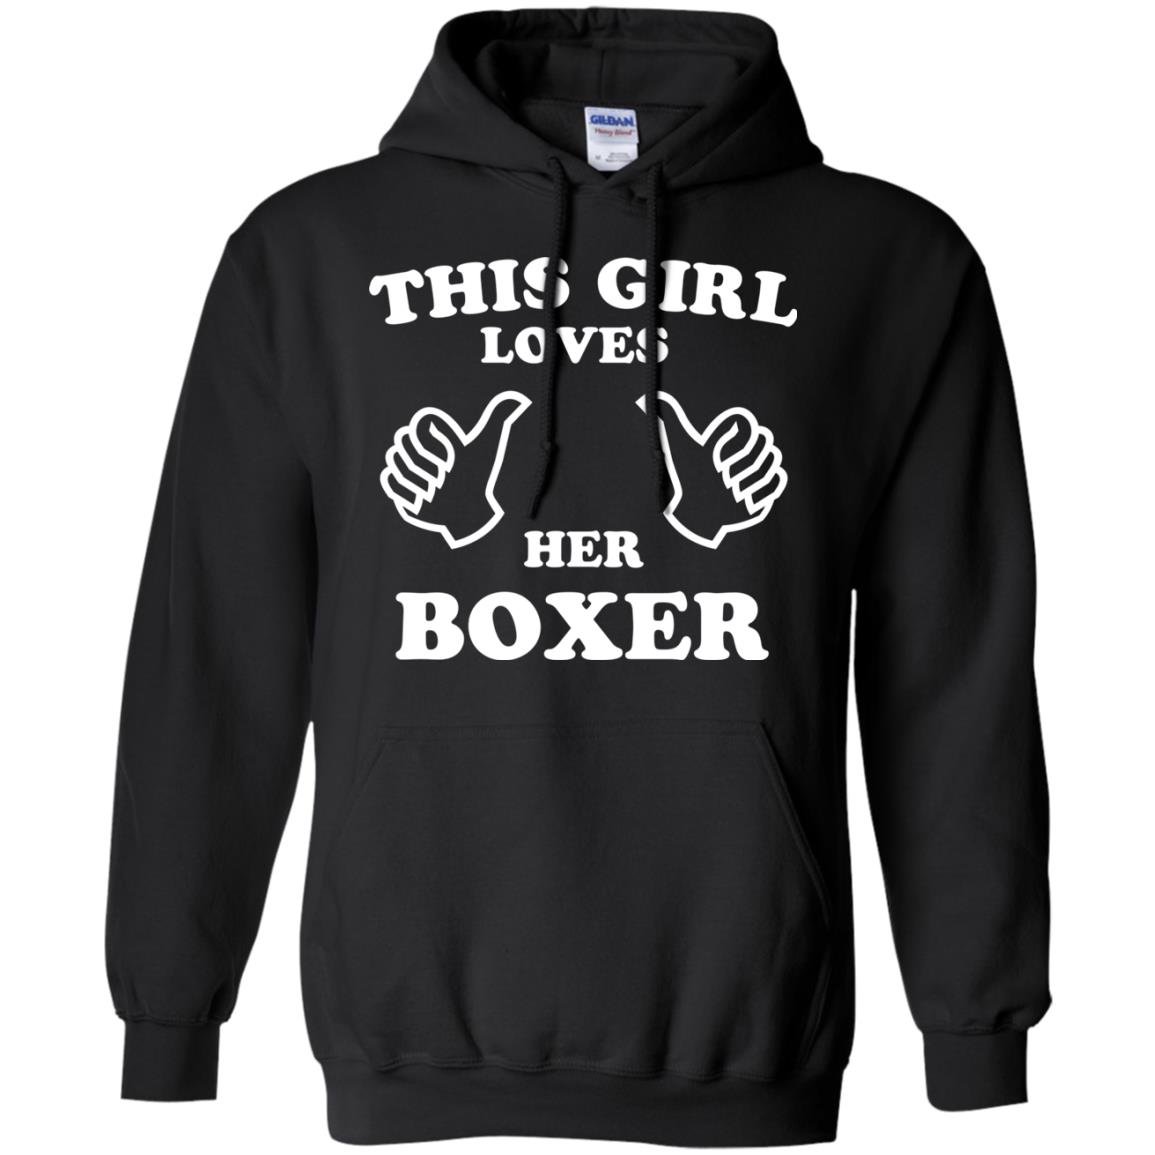 This Girl Loves Her Boxer Pullover Hoodie Black